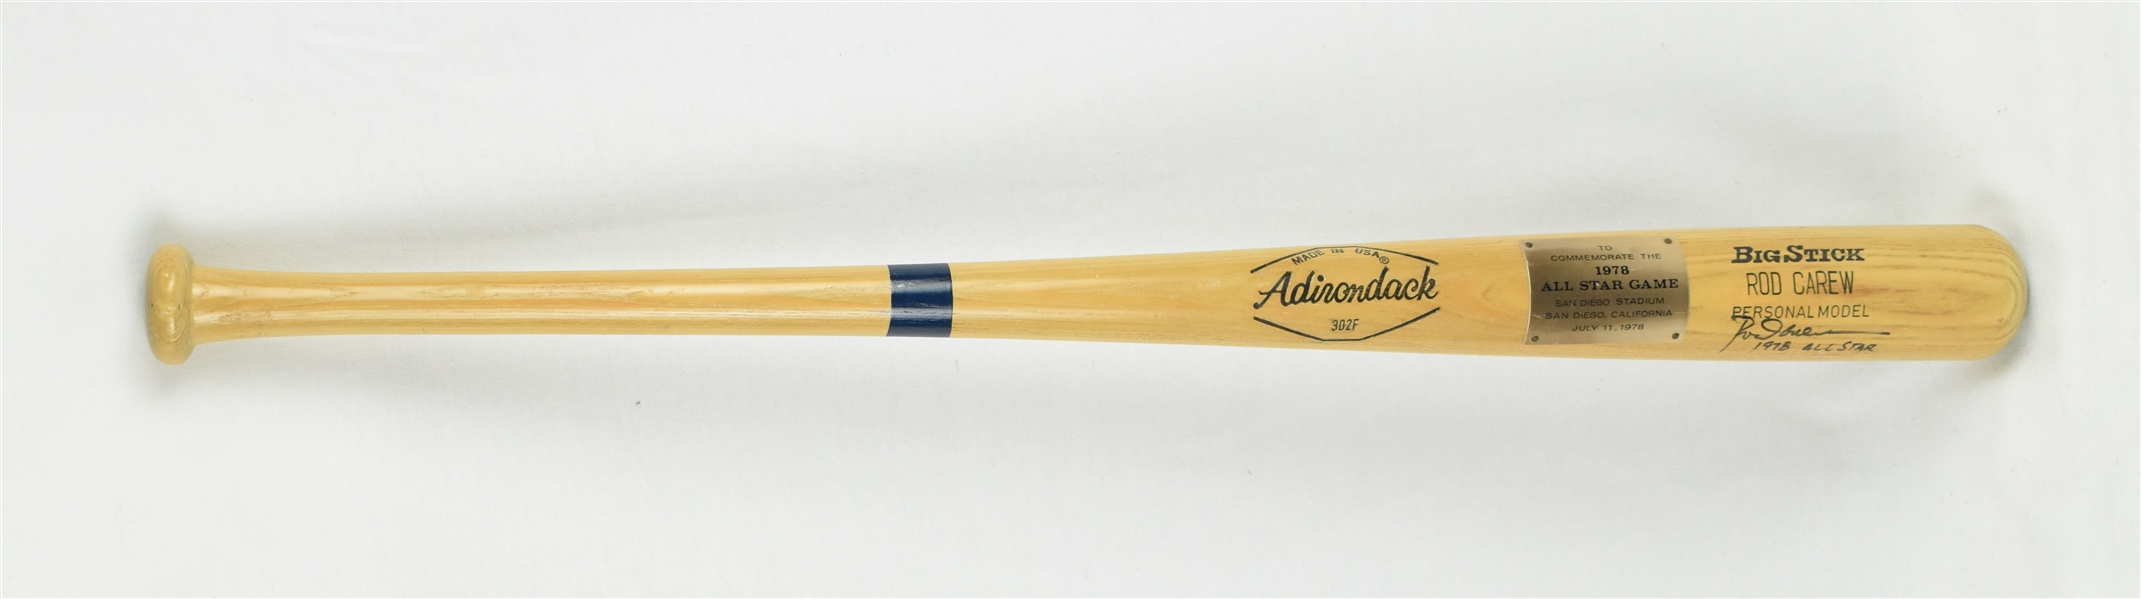 Rod Carew Autographed & Inscribed 1978 All-Star Game Bat